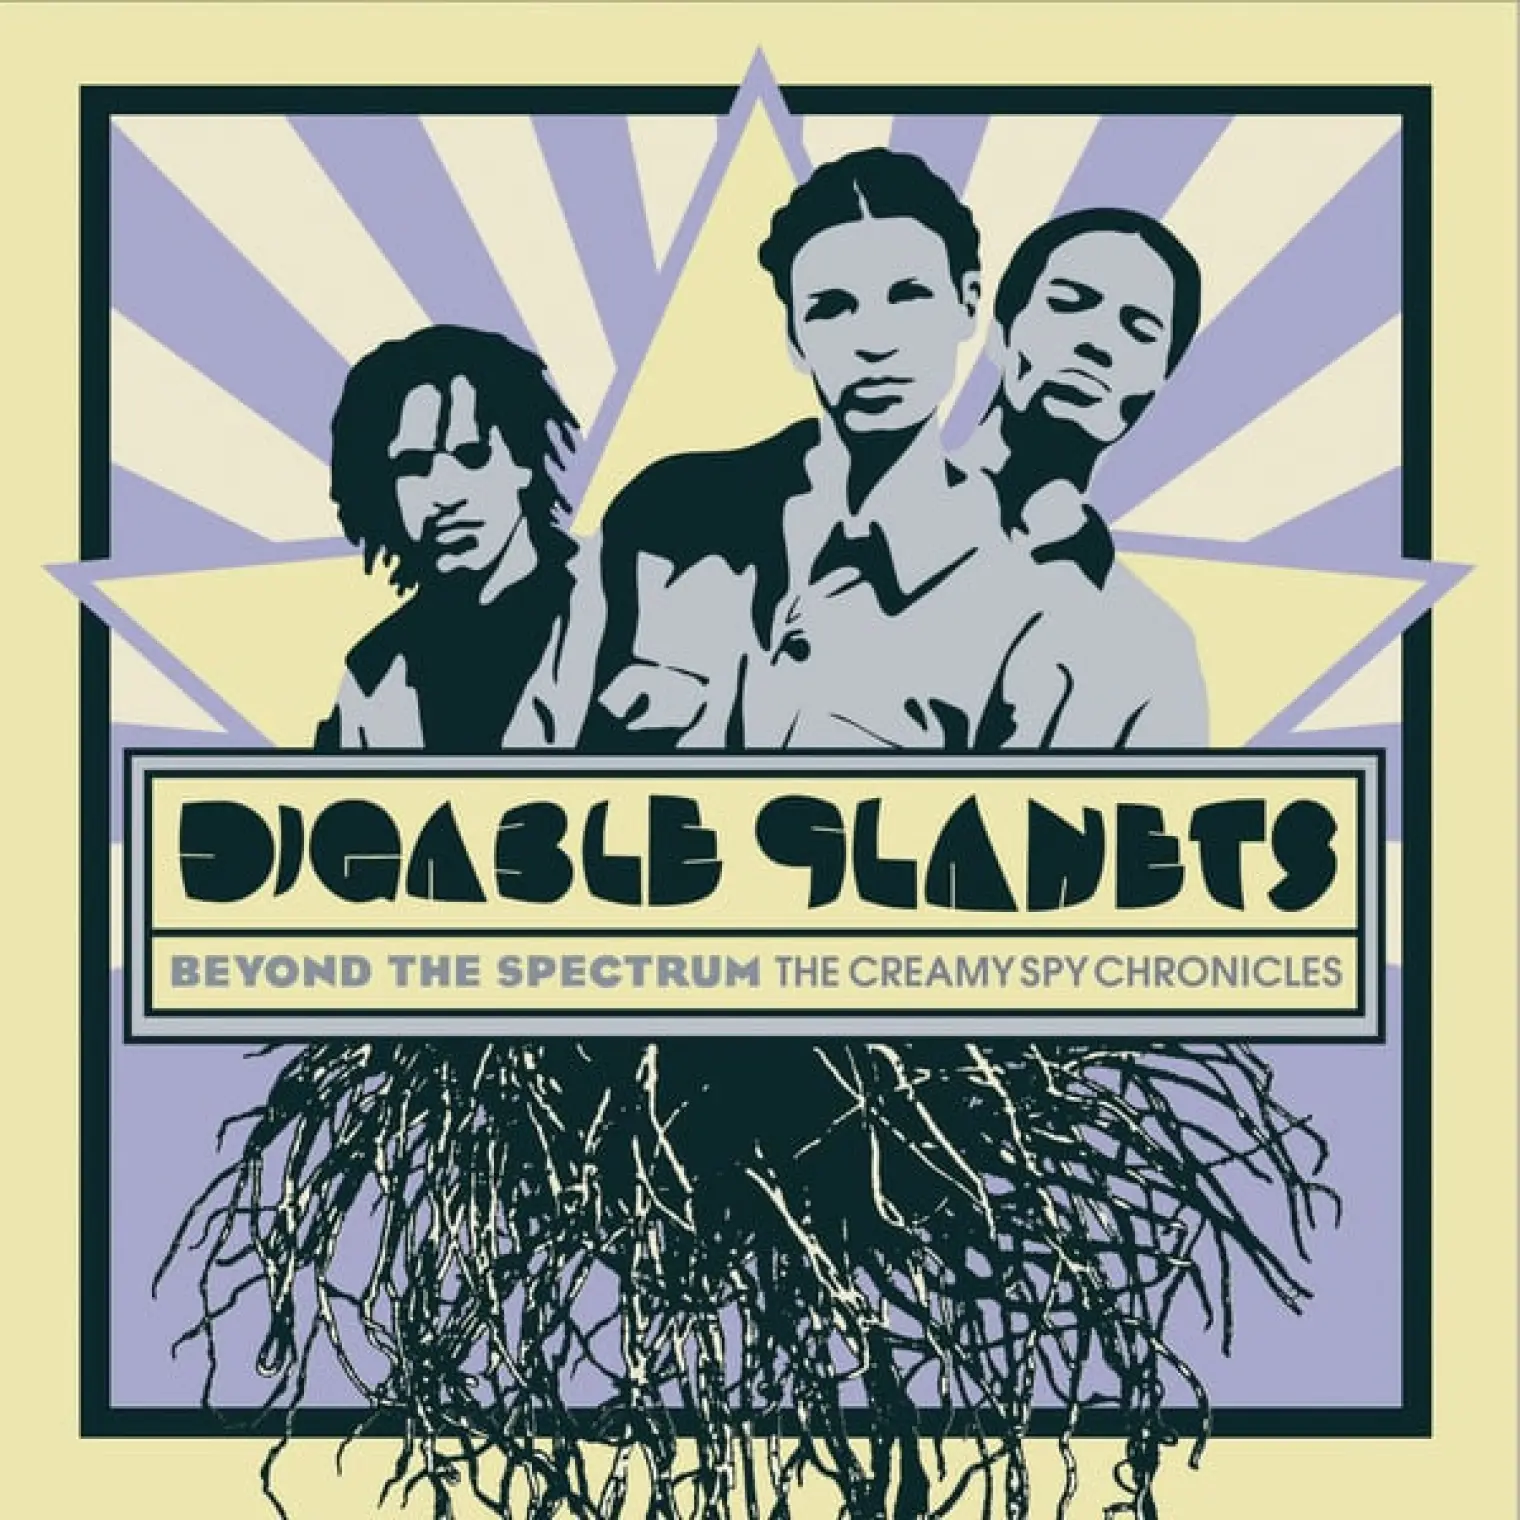 Beyond The Spectrum - The Creamy Spy Chronicles -  Digable Planets 